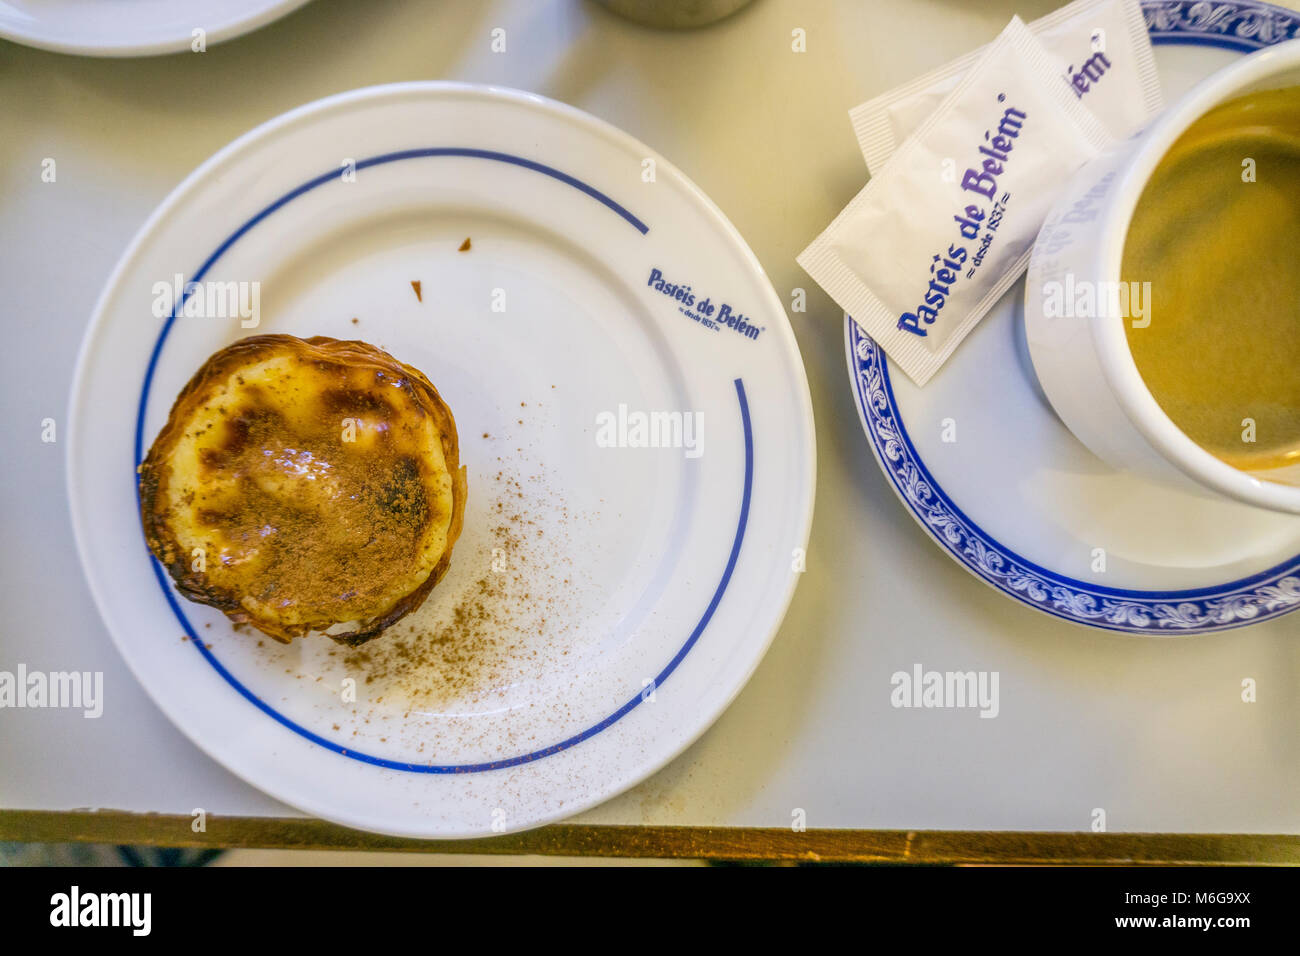 Lisbon, Portugal - January 31, 2018: Traditional portuguese pastry and coffee served in famous Pasteis de Belem Stock Photo